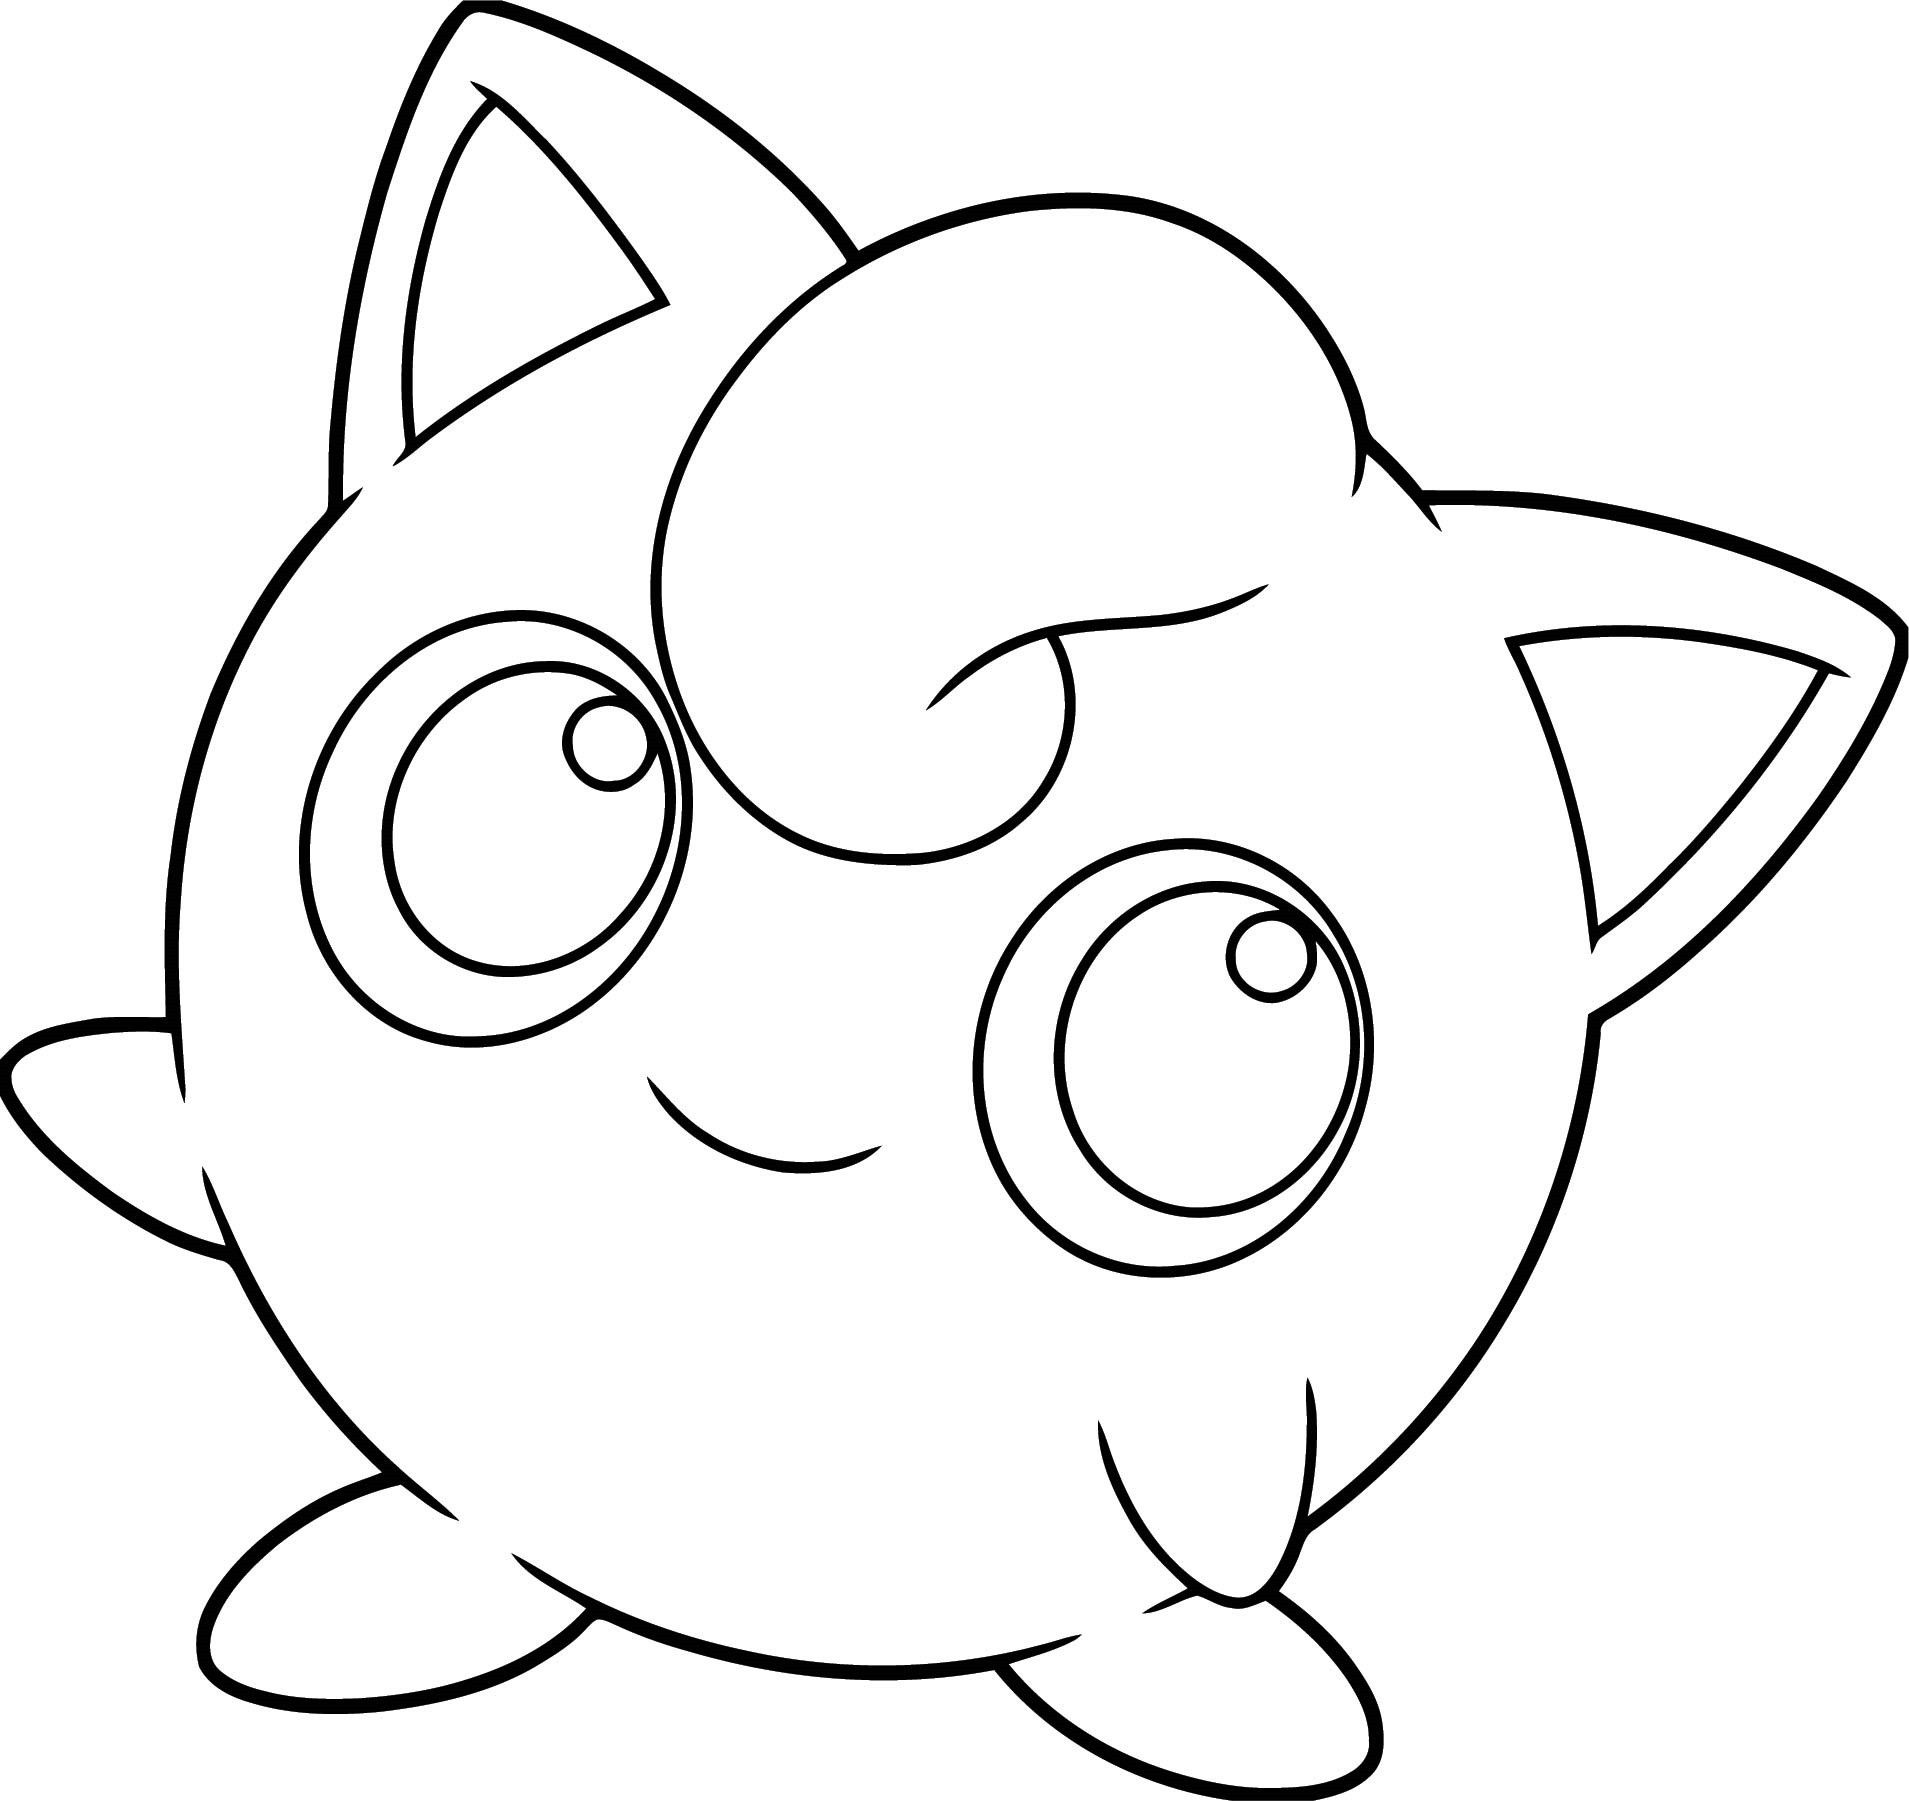 Pokemon go jigglypuff coloring sheets for kids in 2021